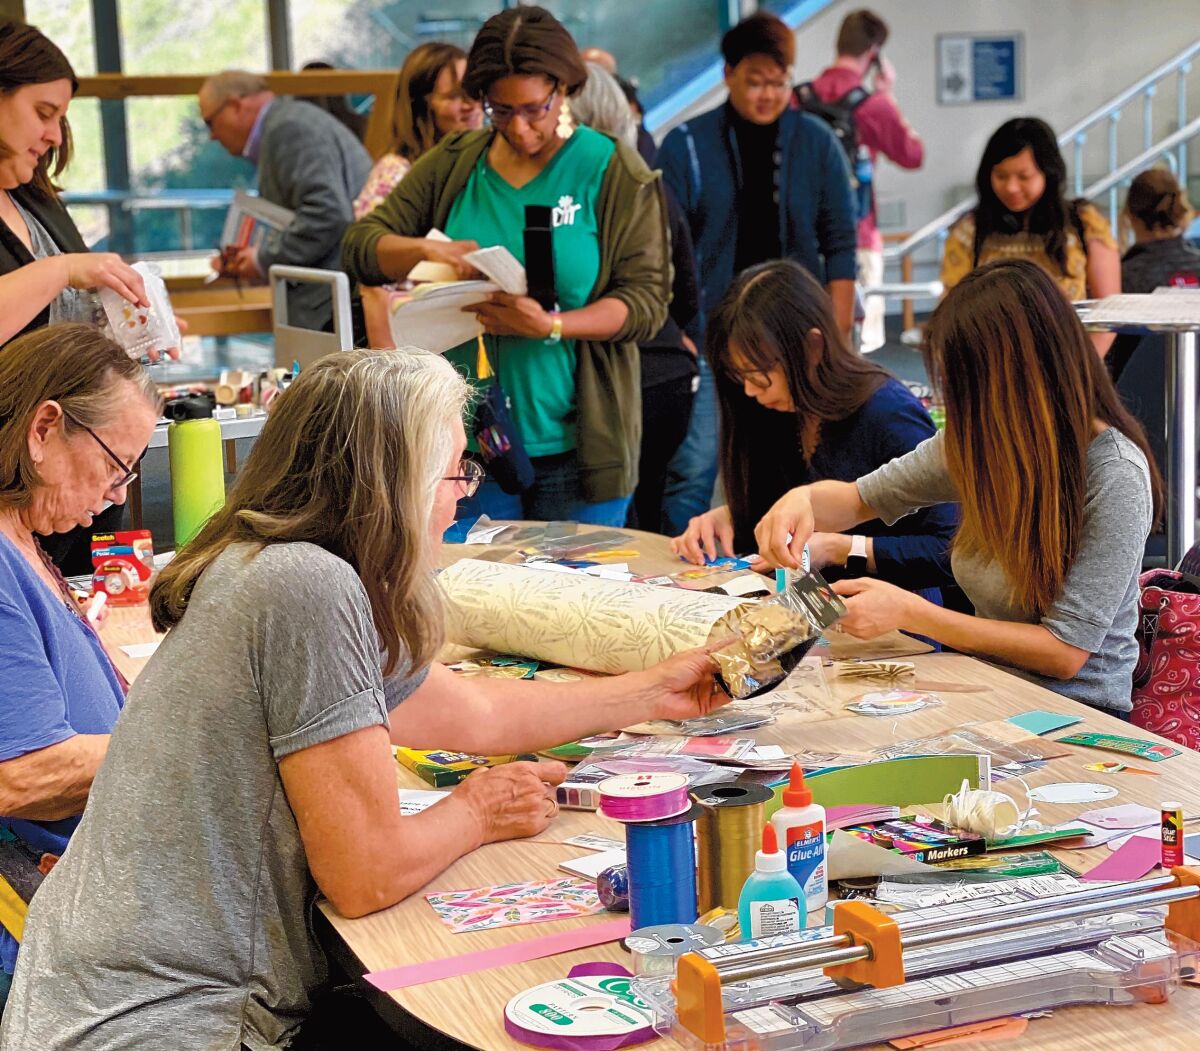 Participants in UC San Diego's Geisel Library celebration of World Bookmark Day, Feb. 25, 2020 create their own bookmarks.